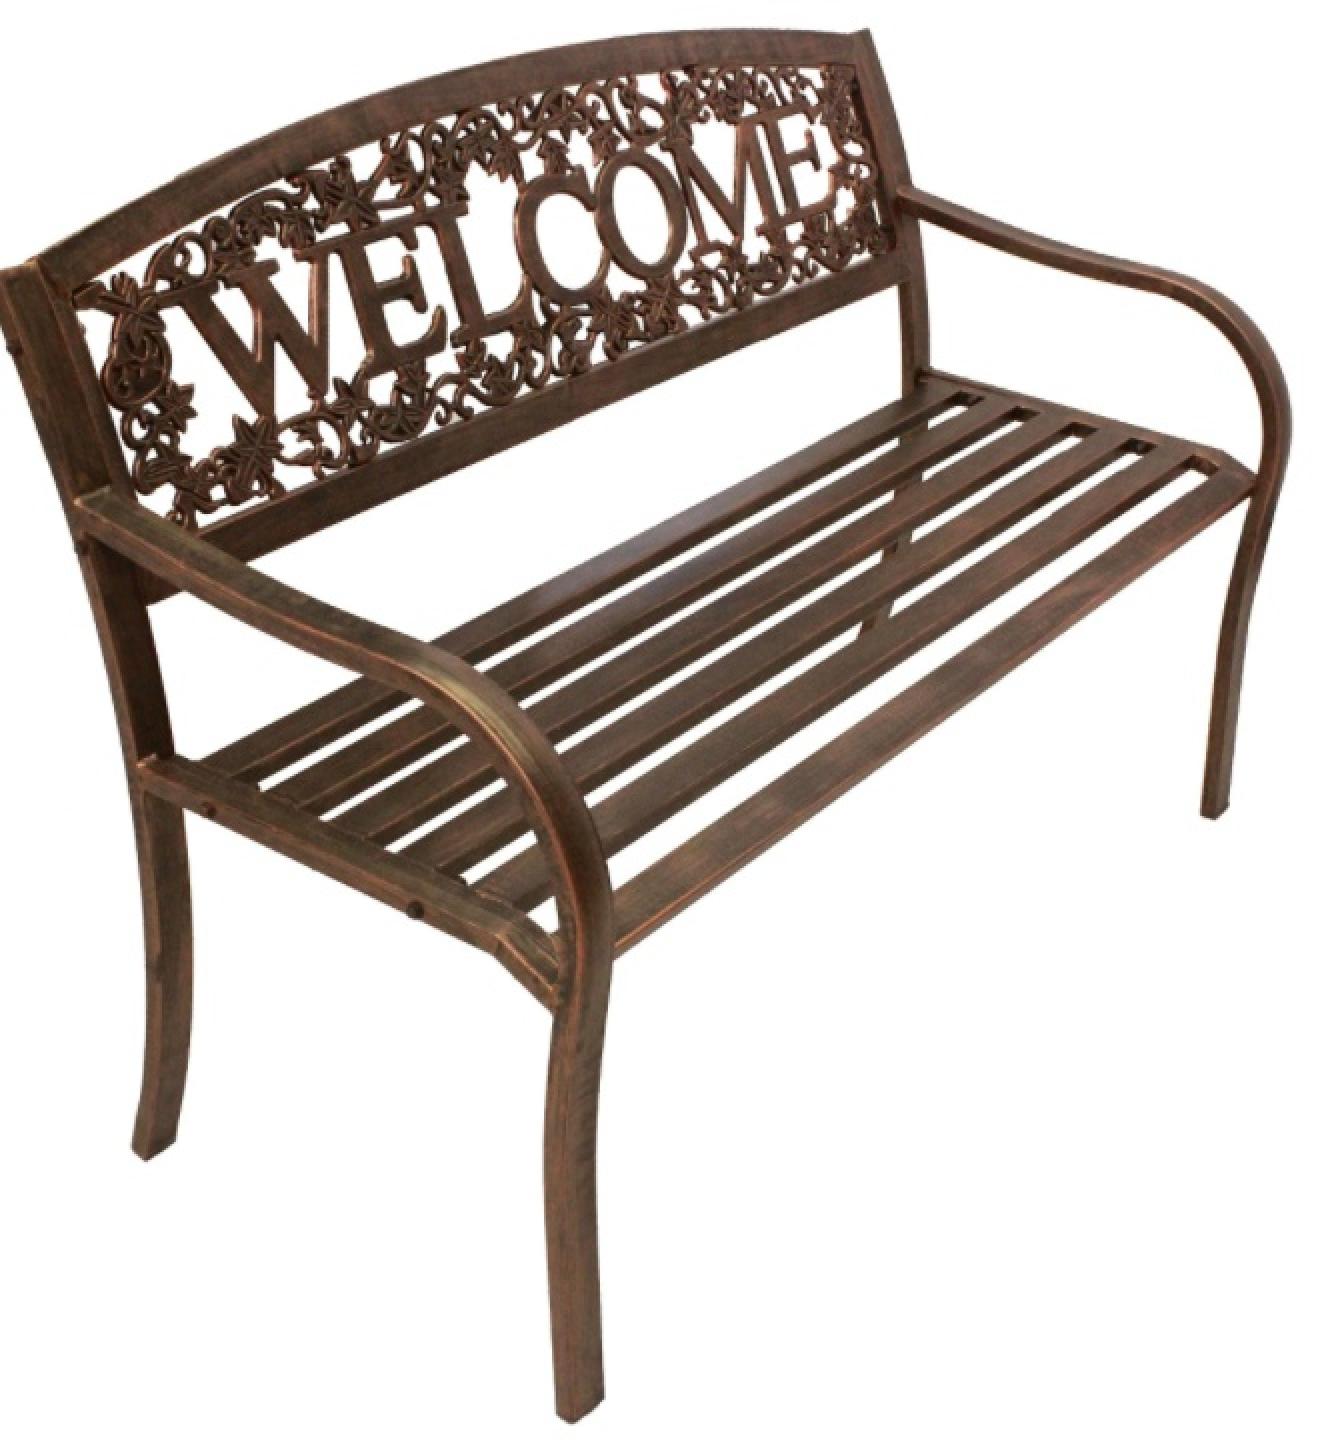 Leigh Country Welcome Metal Bench